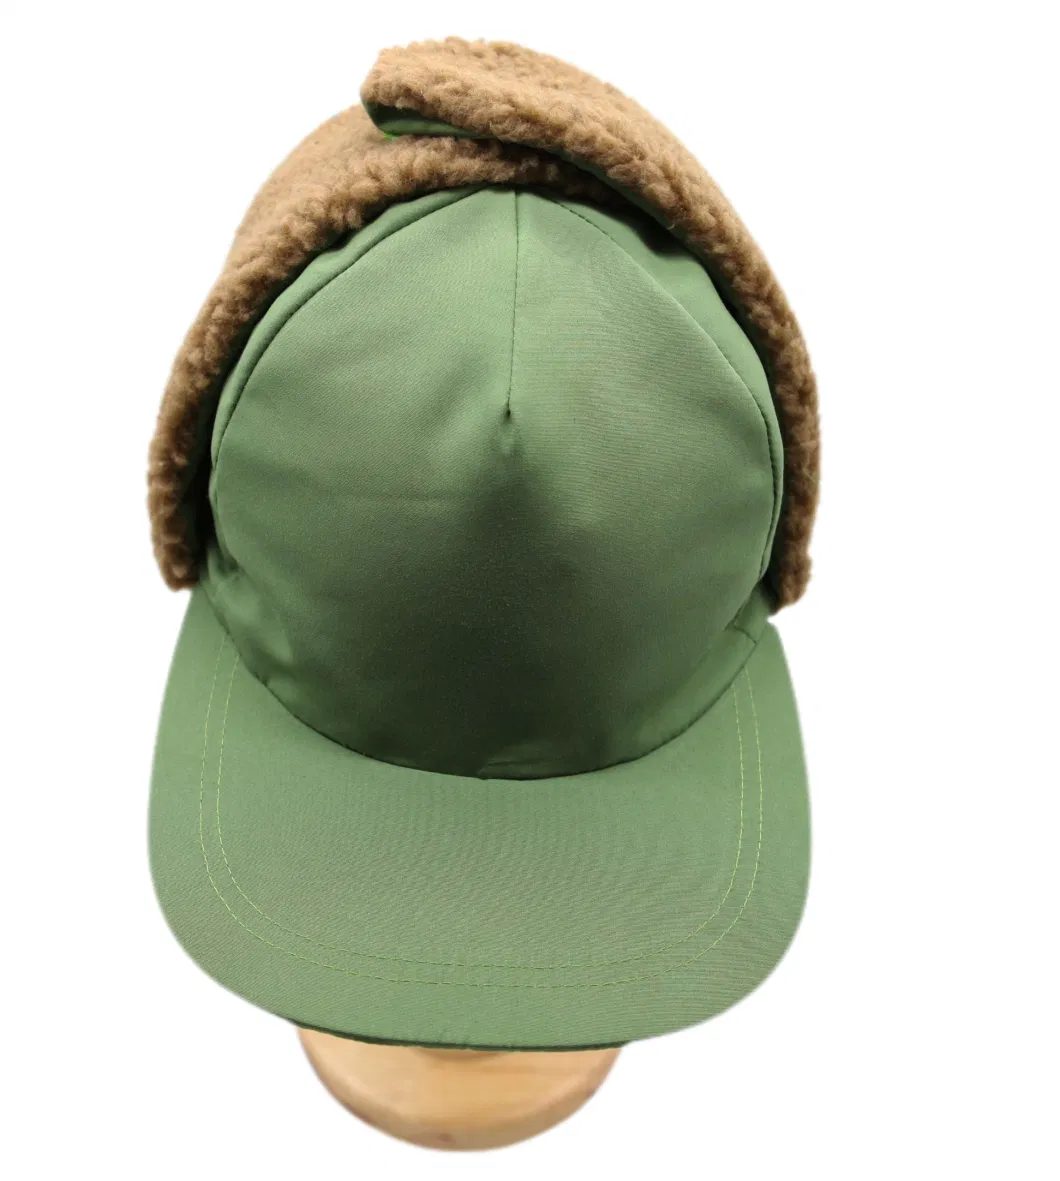 Winter Warm Bomber Trapper Fleece Hat with Foldable Ear Cover Comfortable and Breathable Russian Style Hat